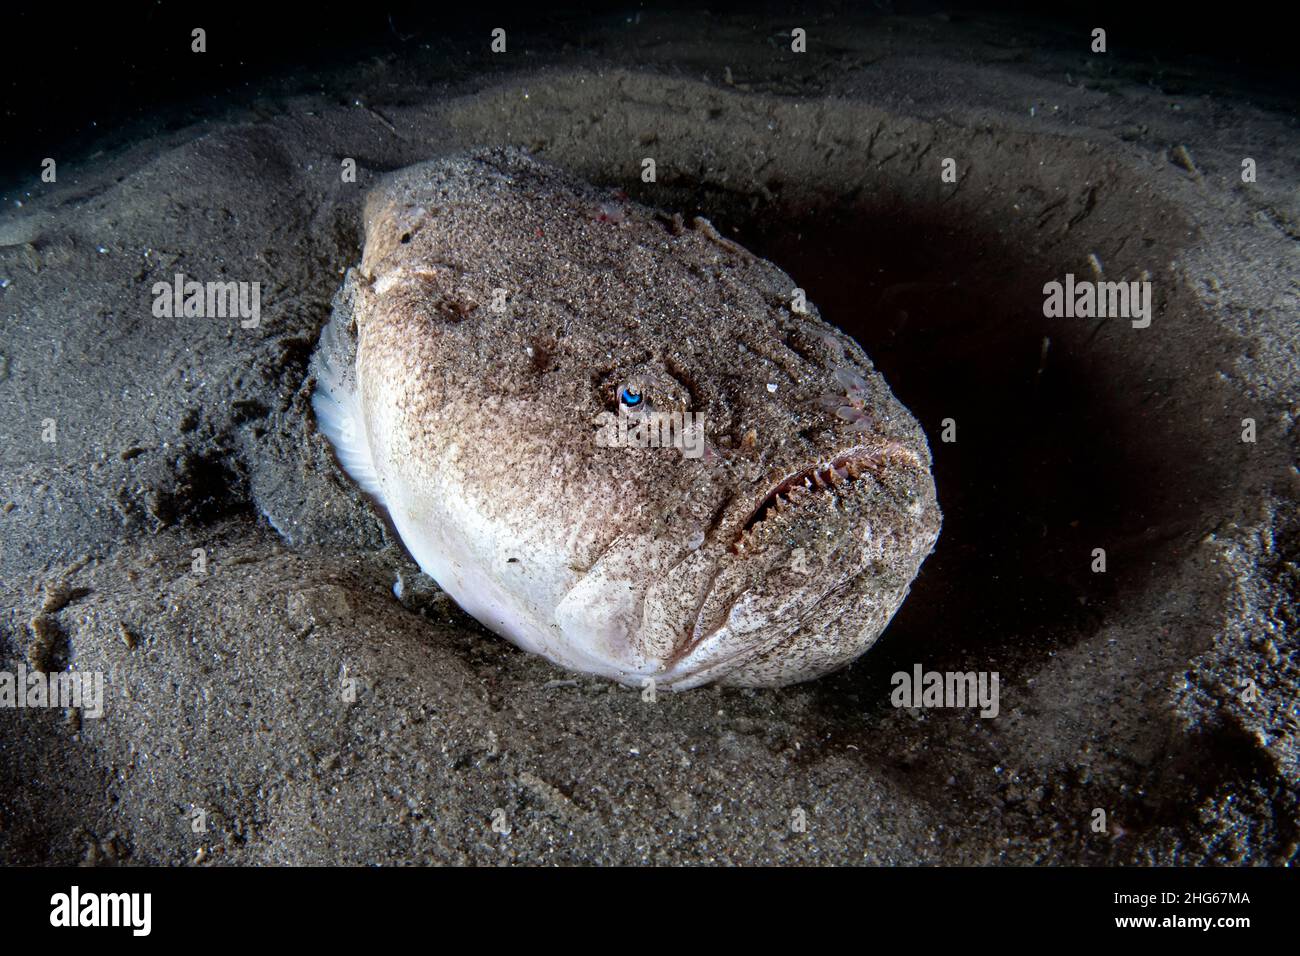 A stargazer fish (Uranoscopus scaber) during a night dive, Italy Stock Photo